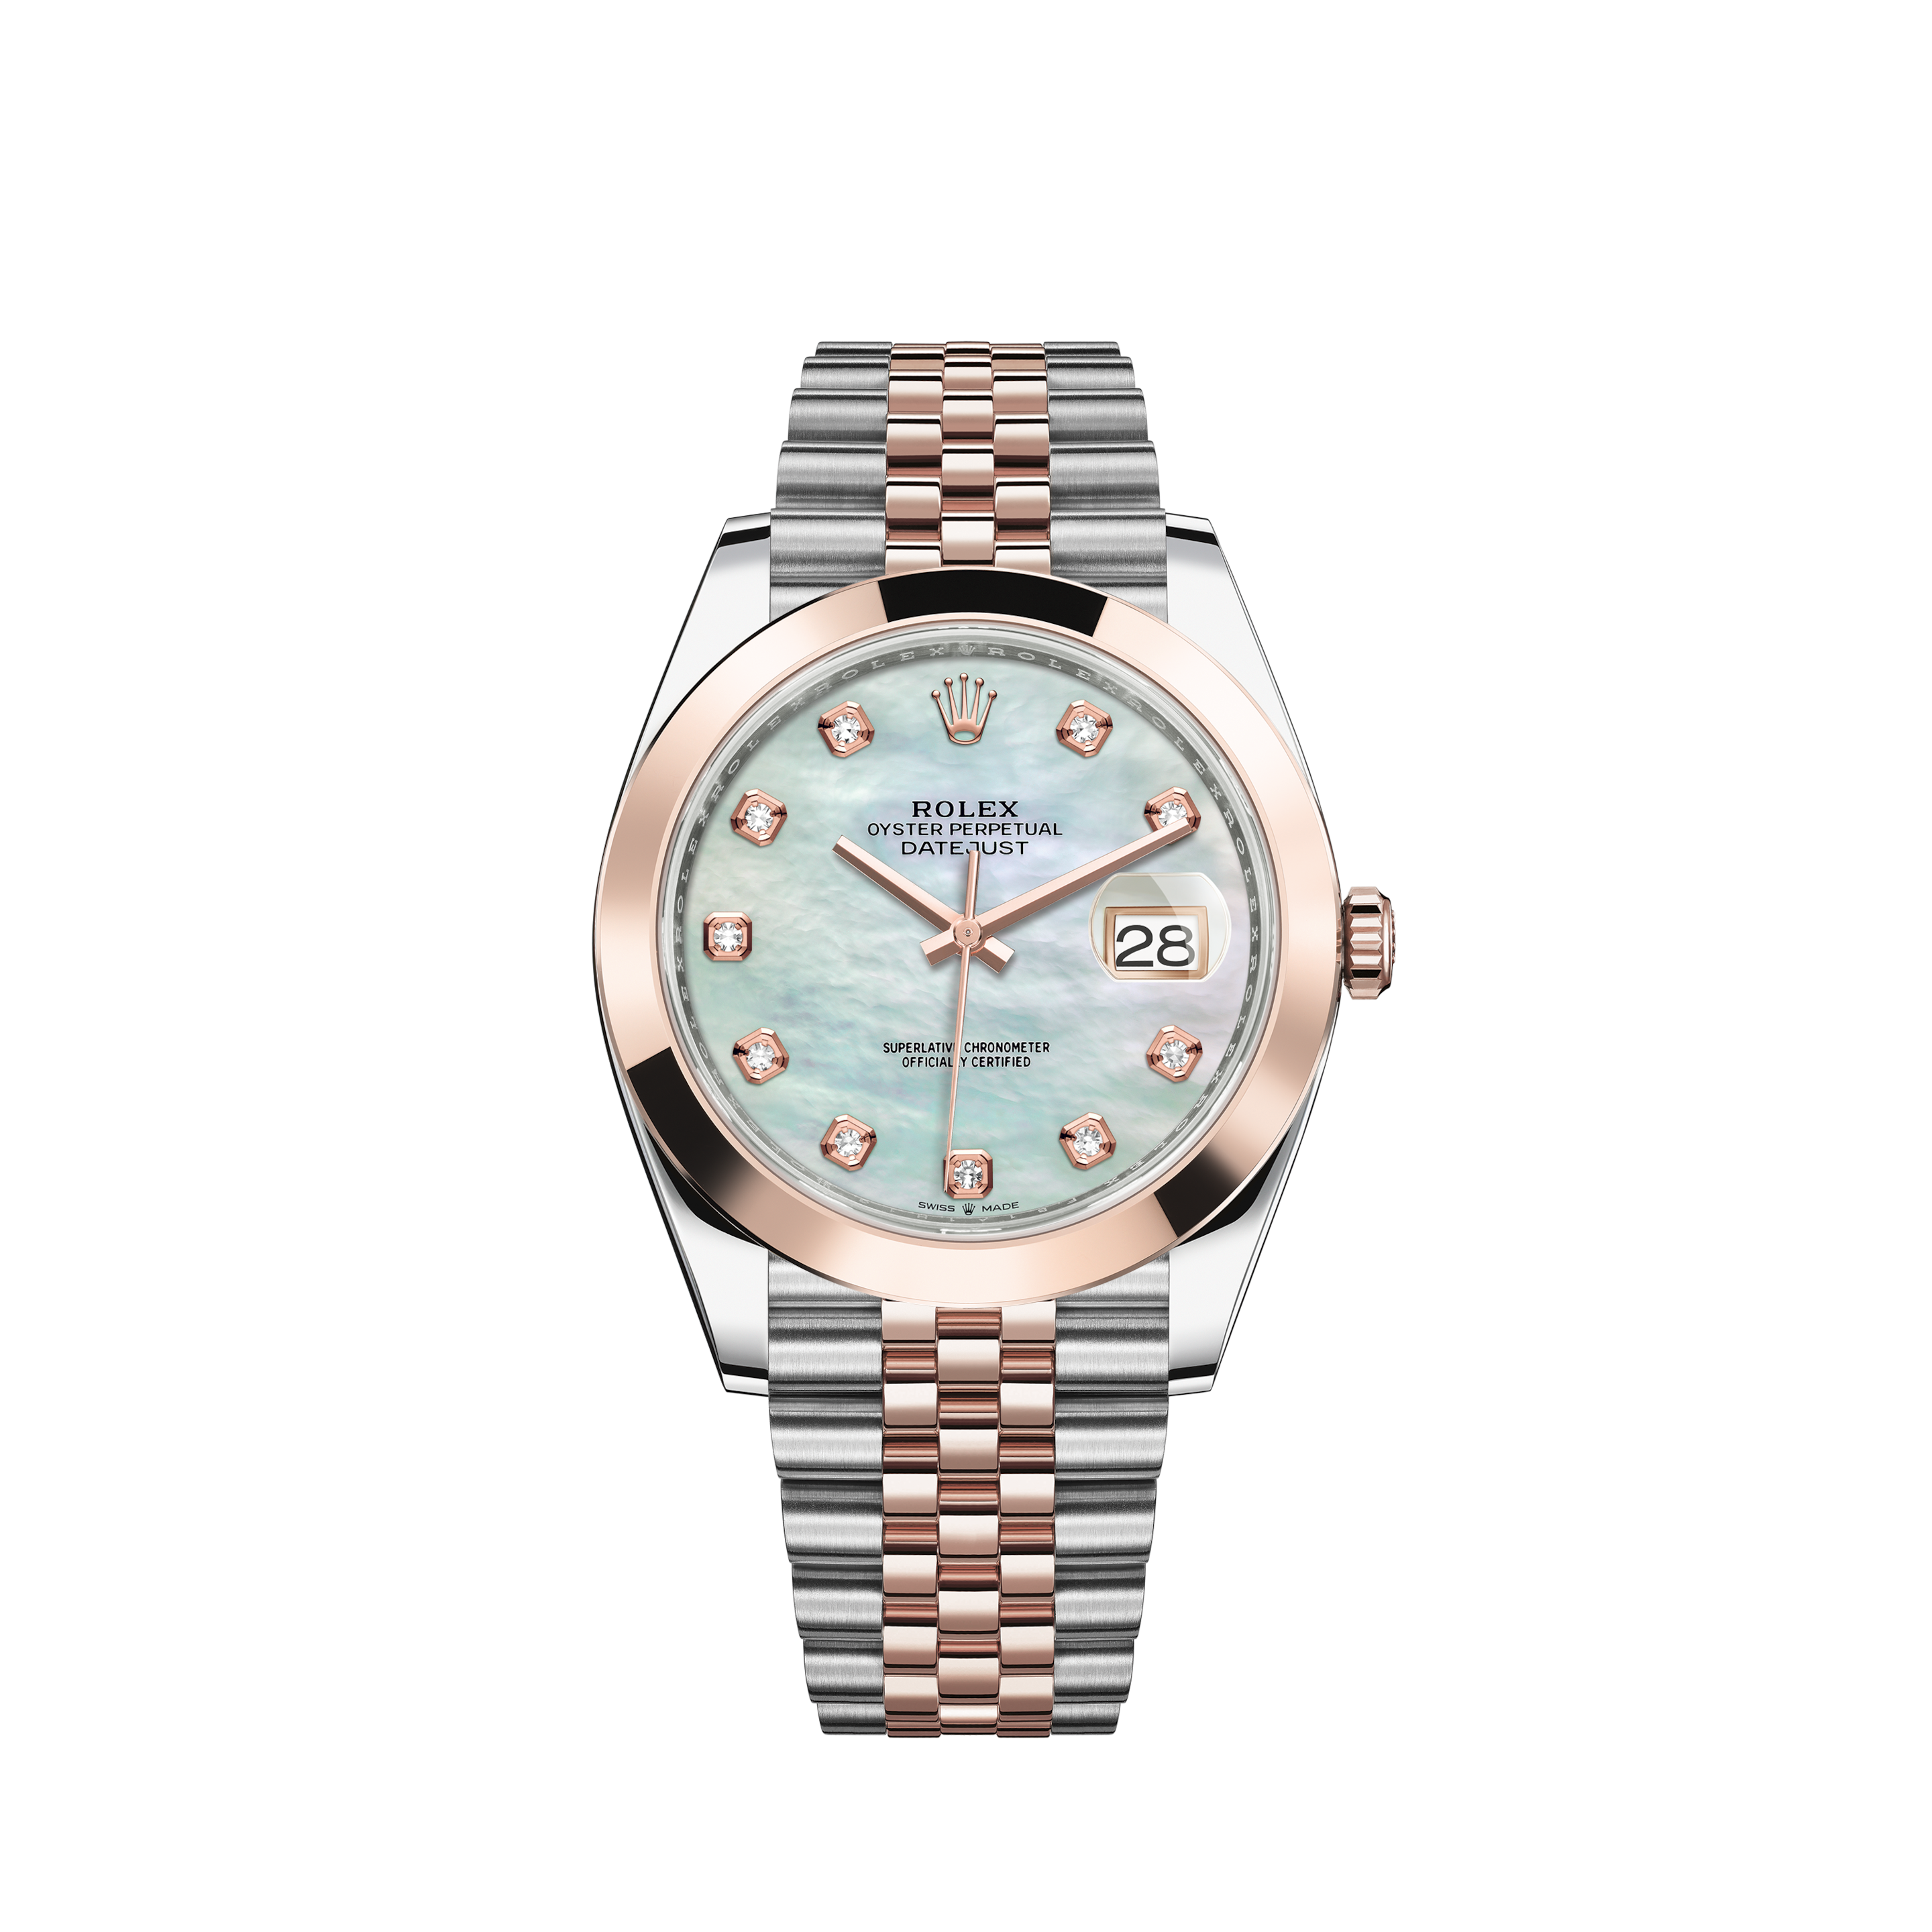 Rolex Datejust 36mm - Steel and Rose Gold - Diamond Bezel - Jubilee 126281RBR DKRDR69JRolex Datejust 36mm - Steel and Rose Gold - Diamond Bezel - Jubilee 126281RBR DKRIJ